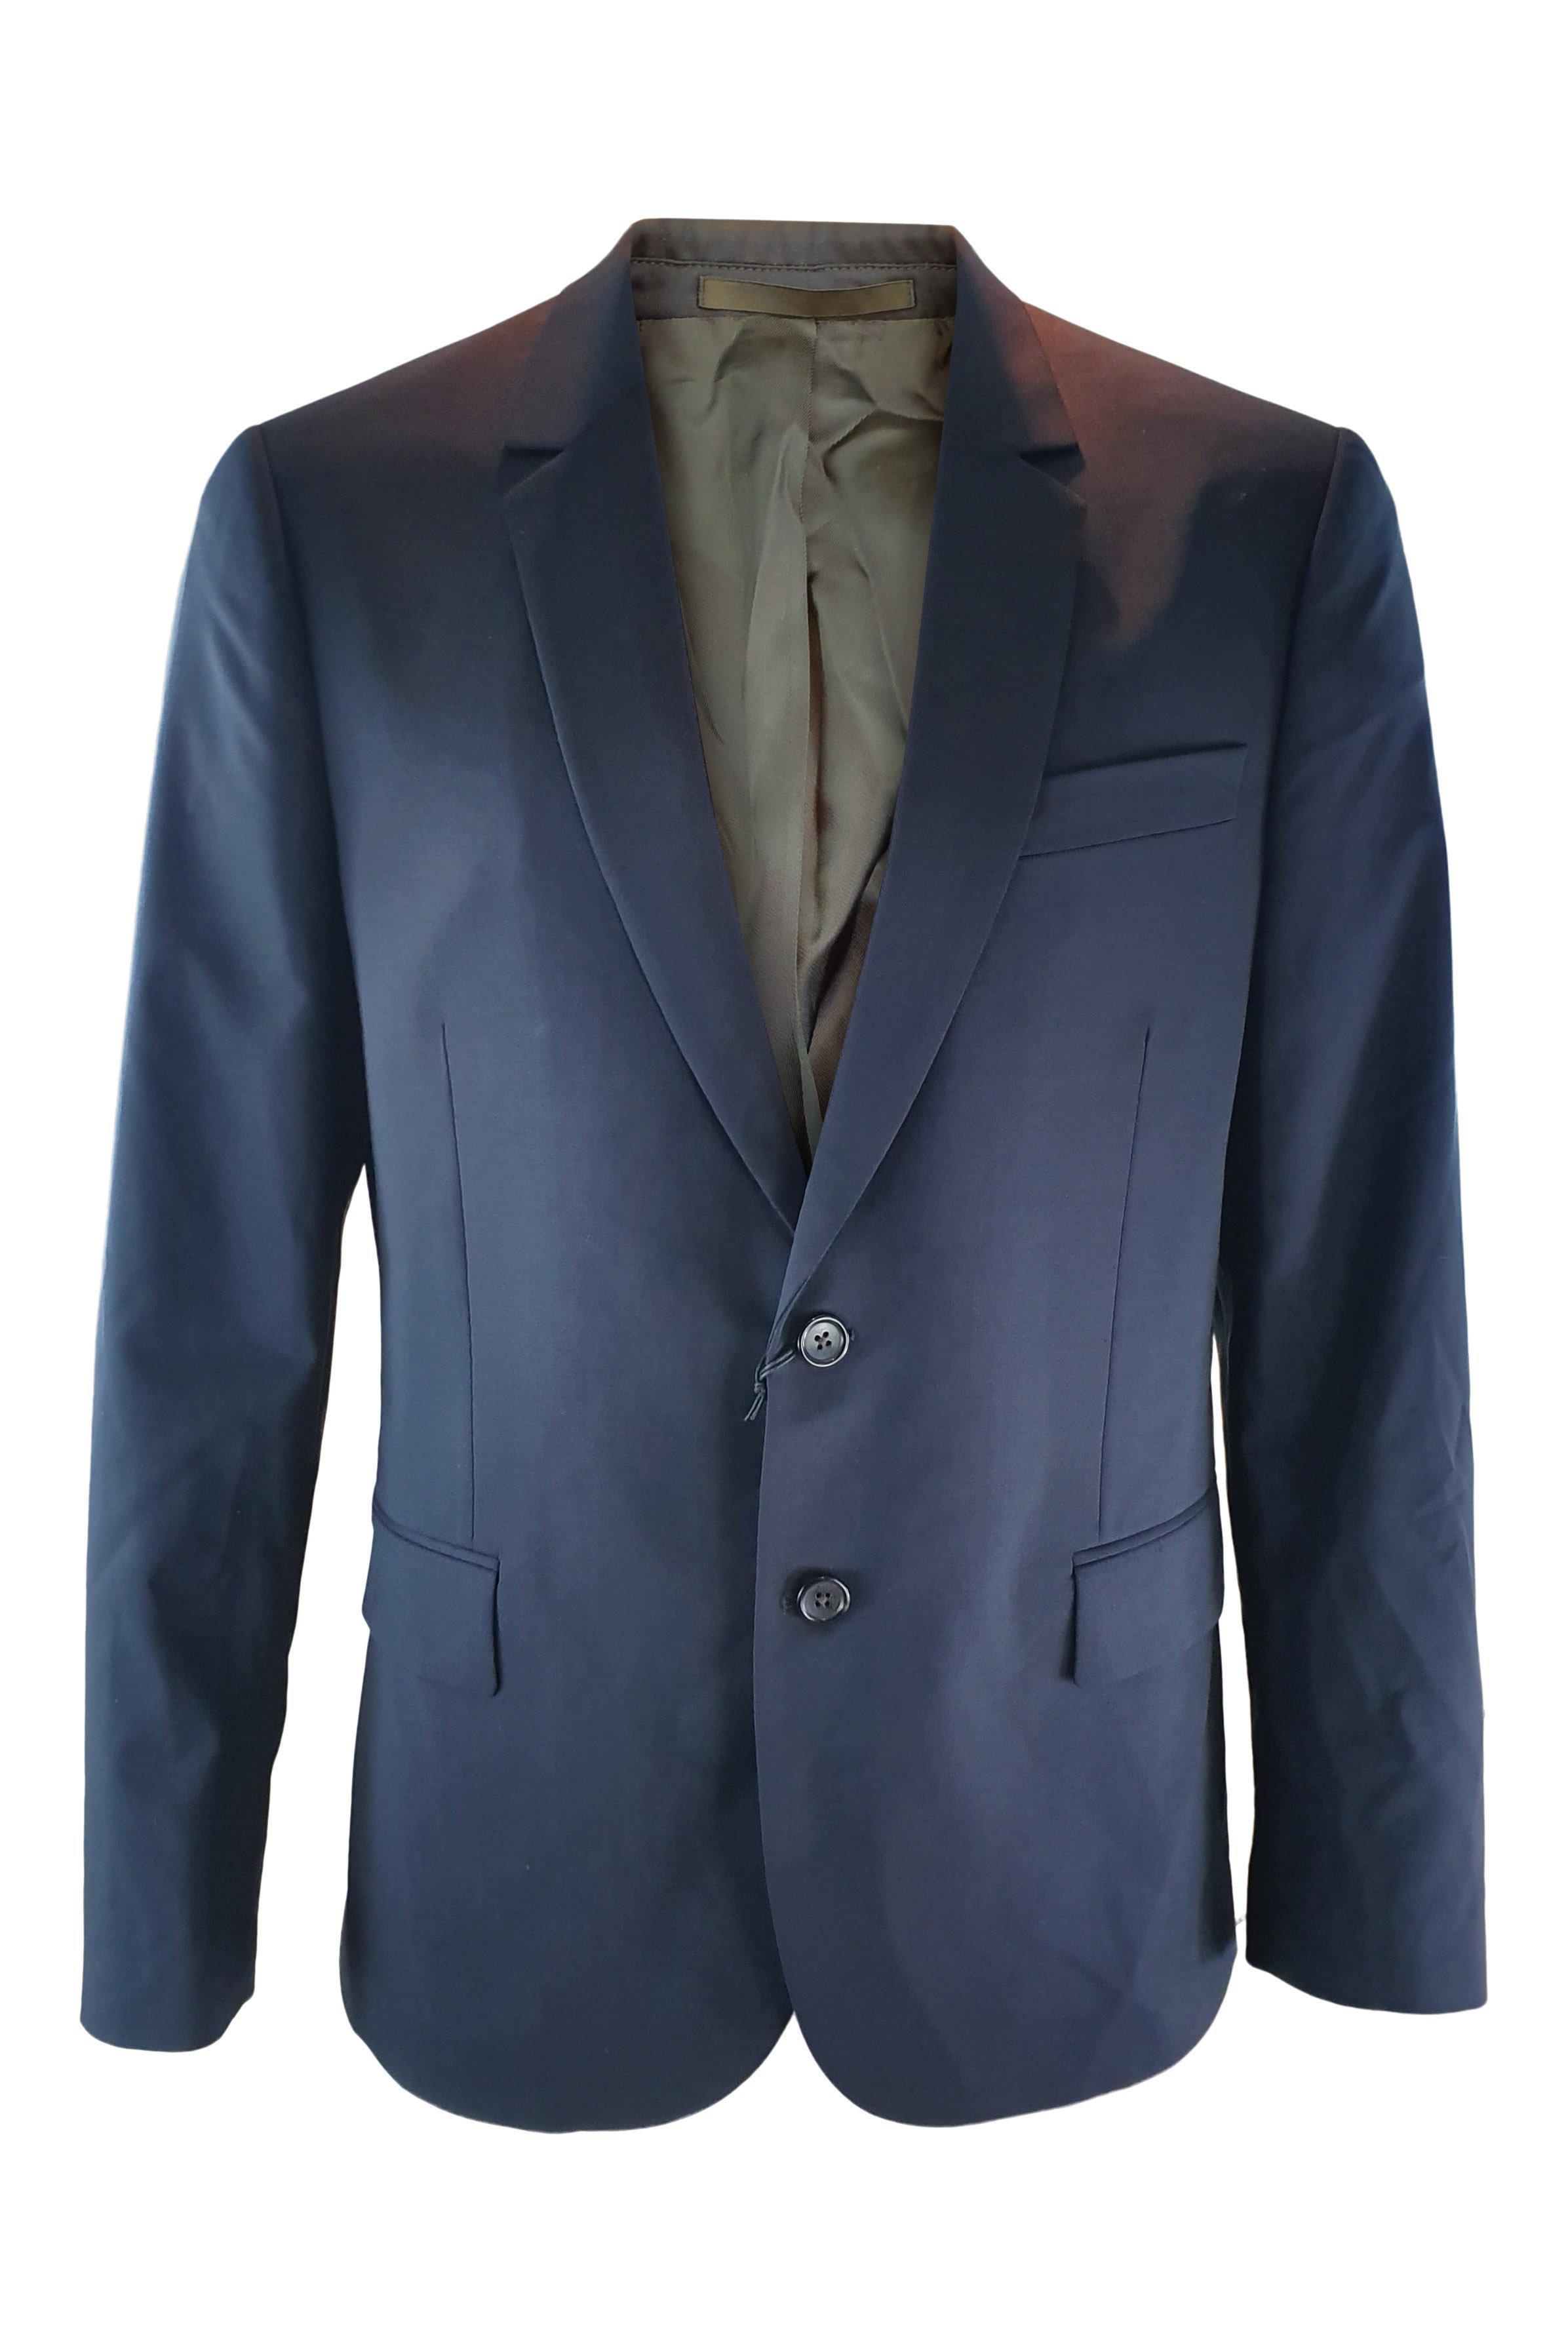 PAUL SMITH Blue Black Wool Blend Single Breasted Blazer Jacket (36:46)-Paul Smith-The Freperie